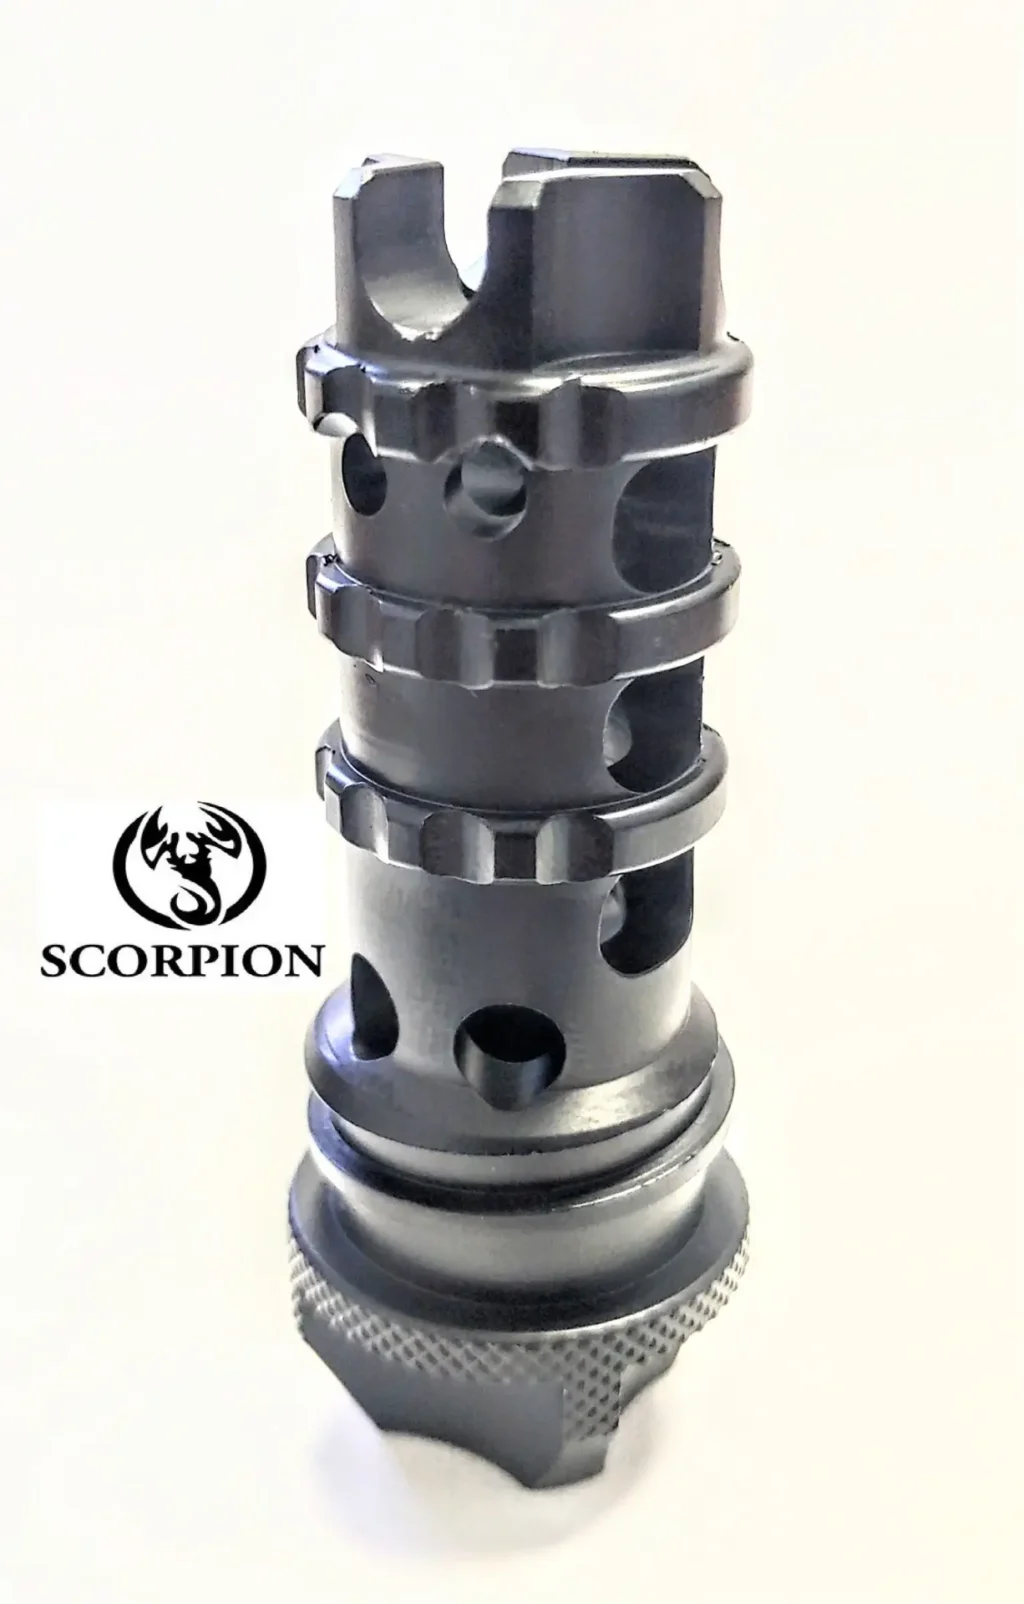 Scorpion STEEL Muzzle Brake Flash Hider Works w/ Solvent Trap Kit D Sized Quick Connect